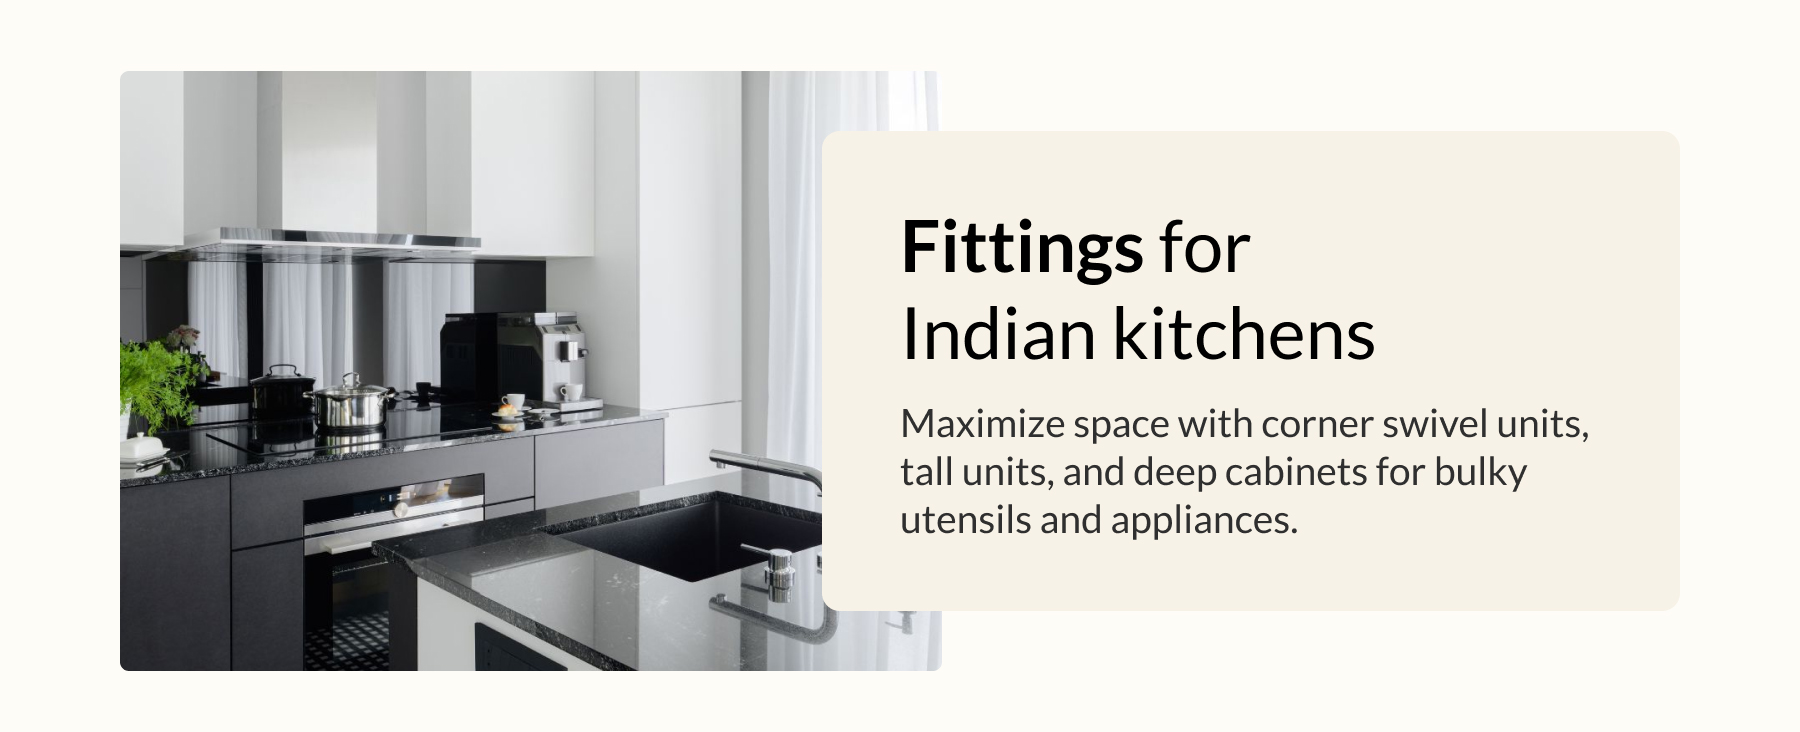 Fittings for Indian kitchens